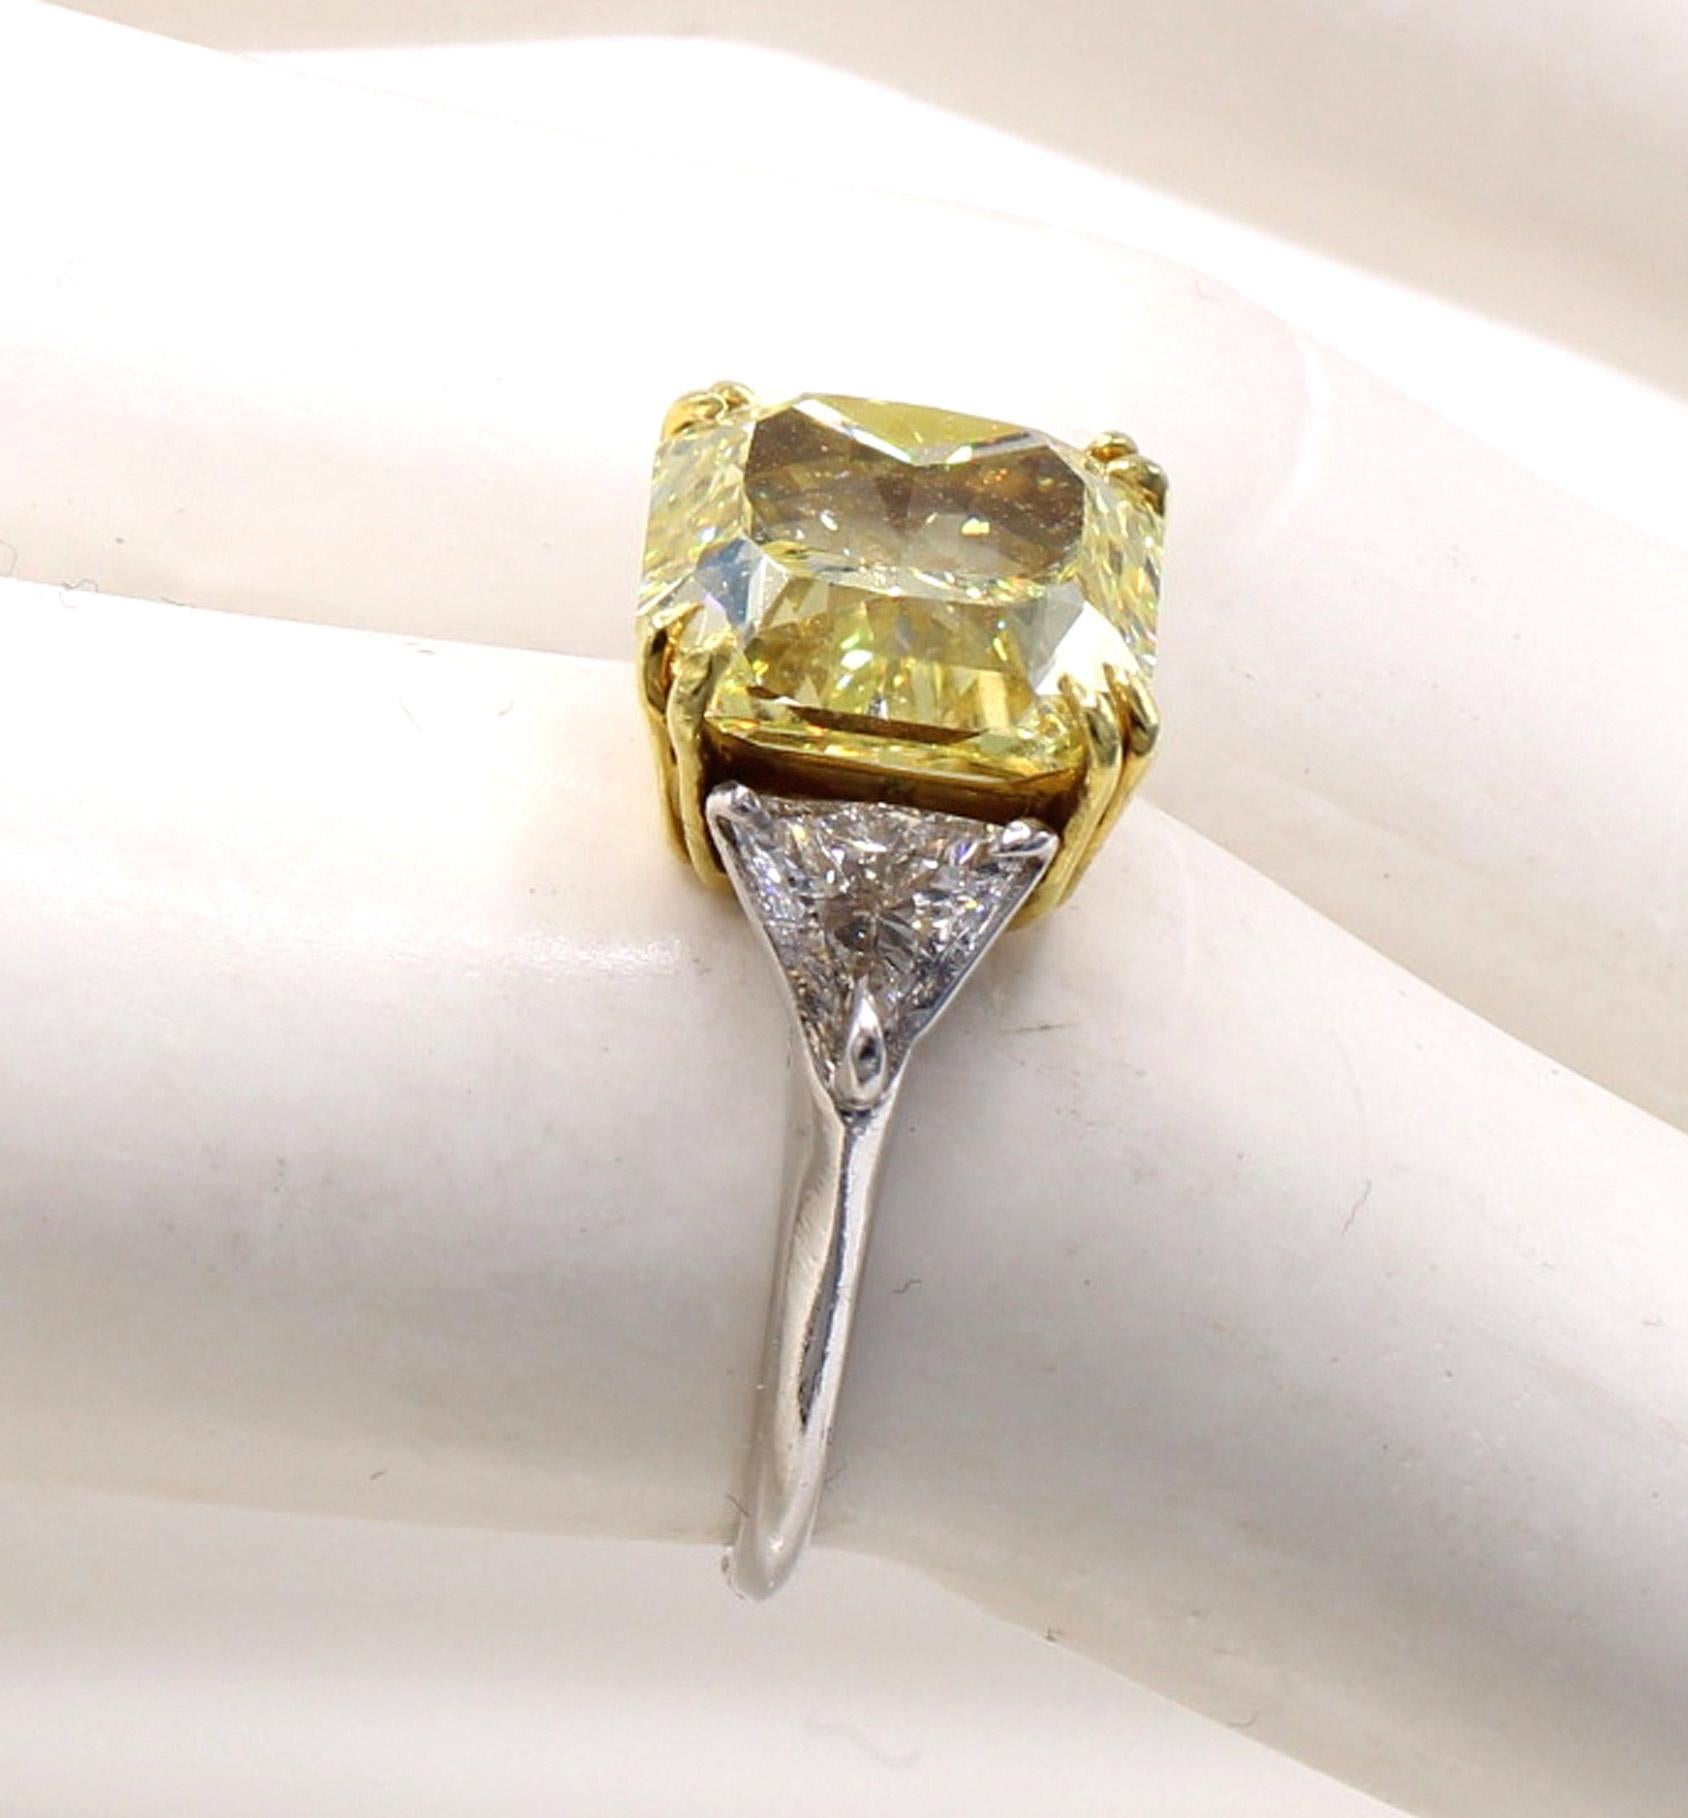 5.03 Carat Fancy Intense Yellow Radiant Cut Diamond Ring In Excellent Condition For Sale In New York, NY